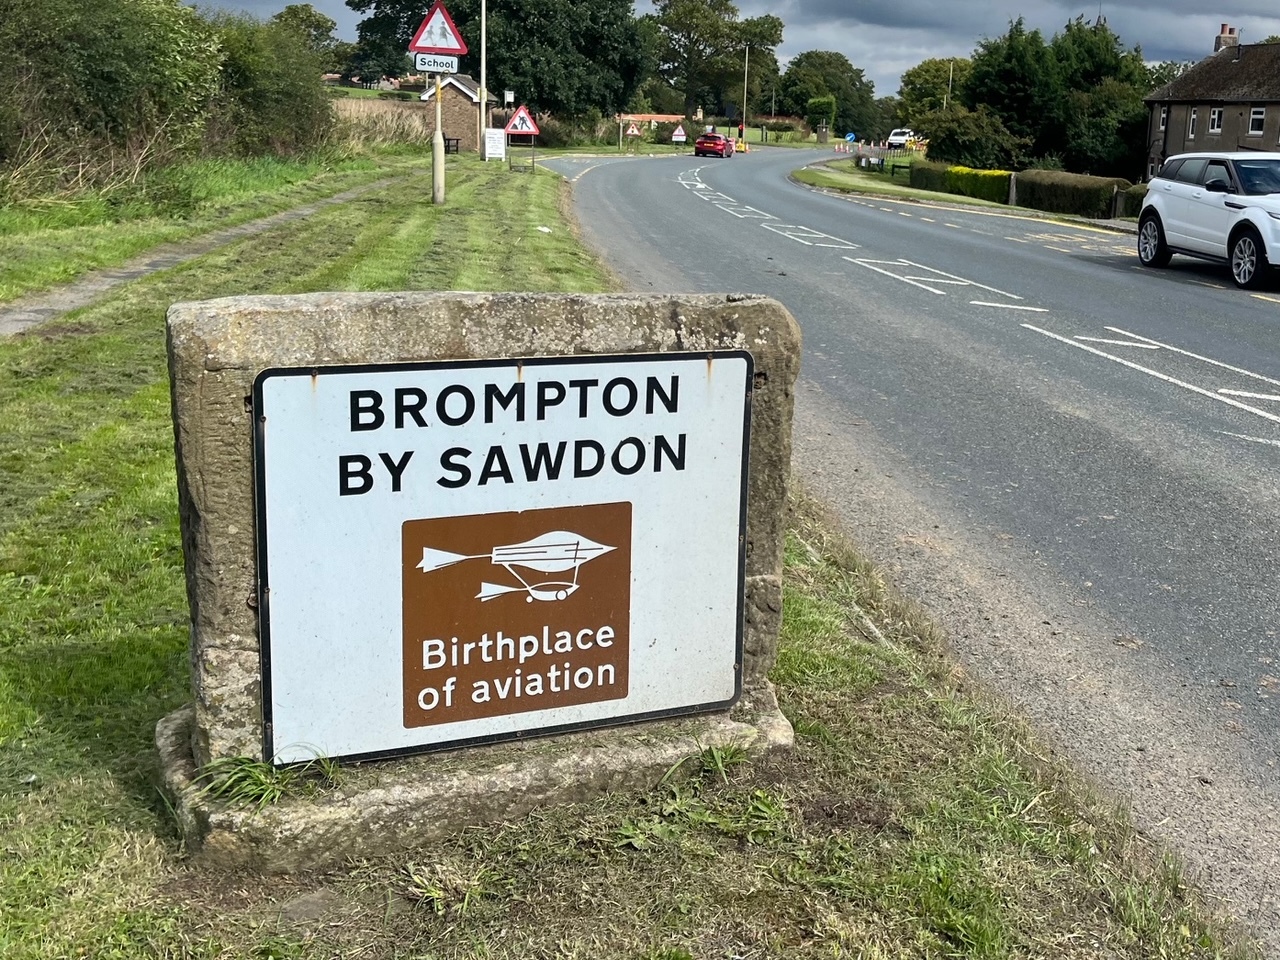 Brompton by Sawdon near Scarborough claims to be the Birthplace of Aviation